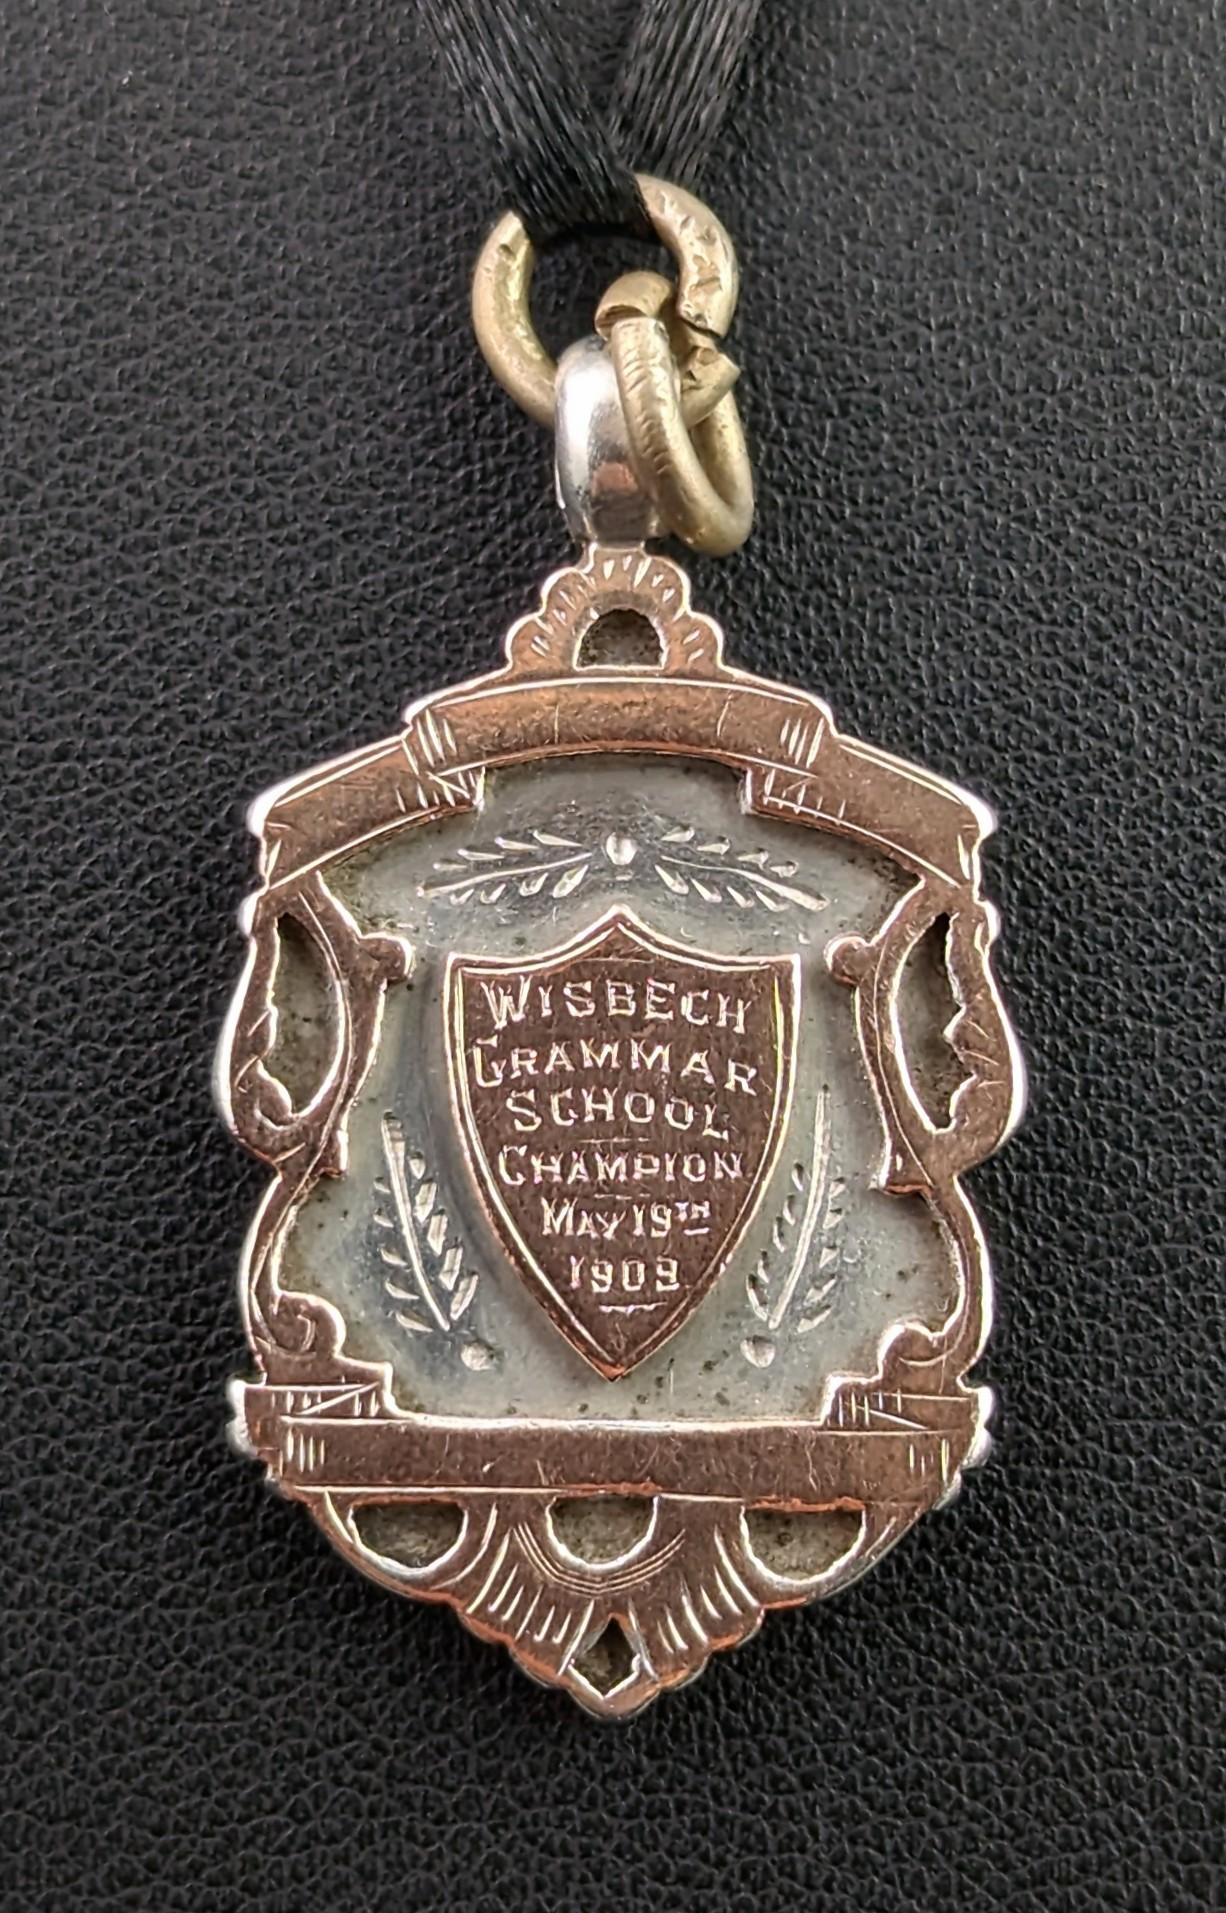 An attractive antique, Edwardian sterling silver and Rose gold shield fob.

A nice heavy fob with a decorative shield shaped design and a 9kt Rose gold cartouche to the centre, this has been monogrammed on both sides for Wisbech Grammar School,